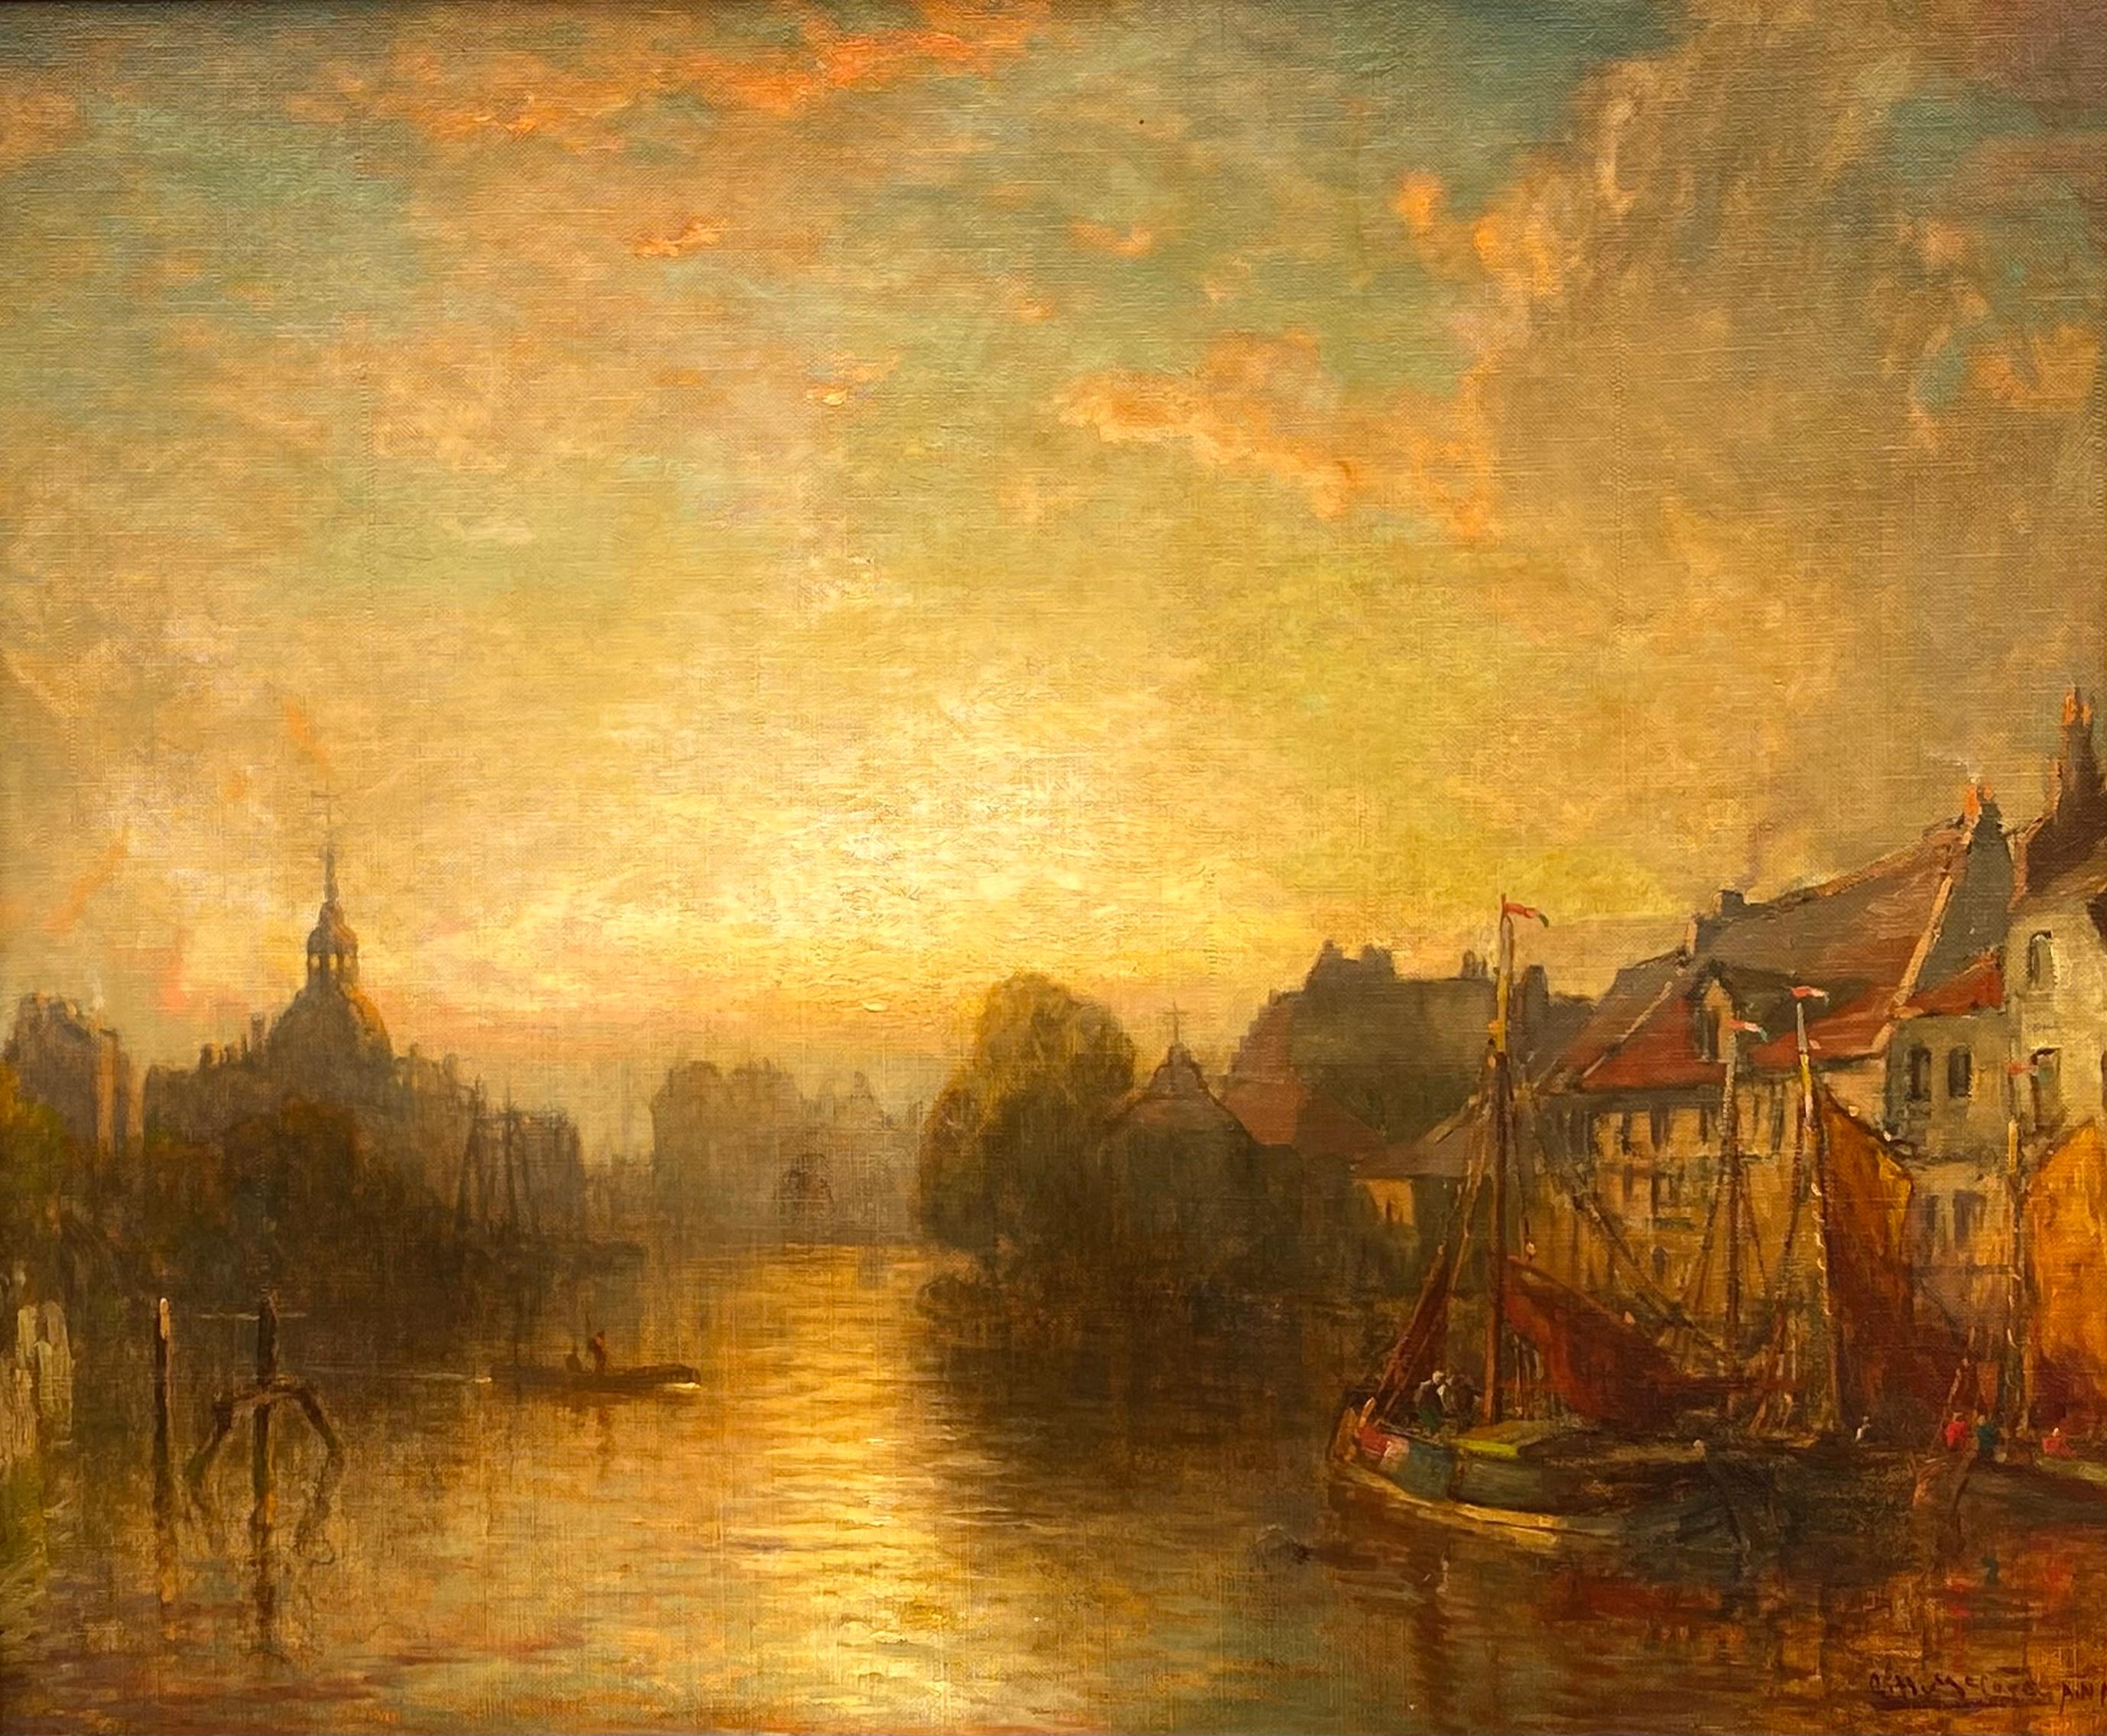 George McCord Landscape Painting - “Amsterdam Harbor at Sunset”